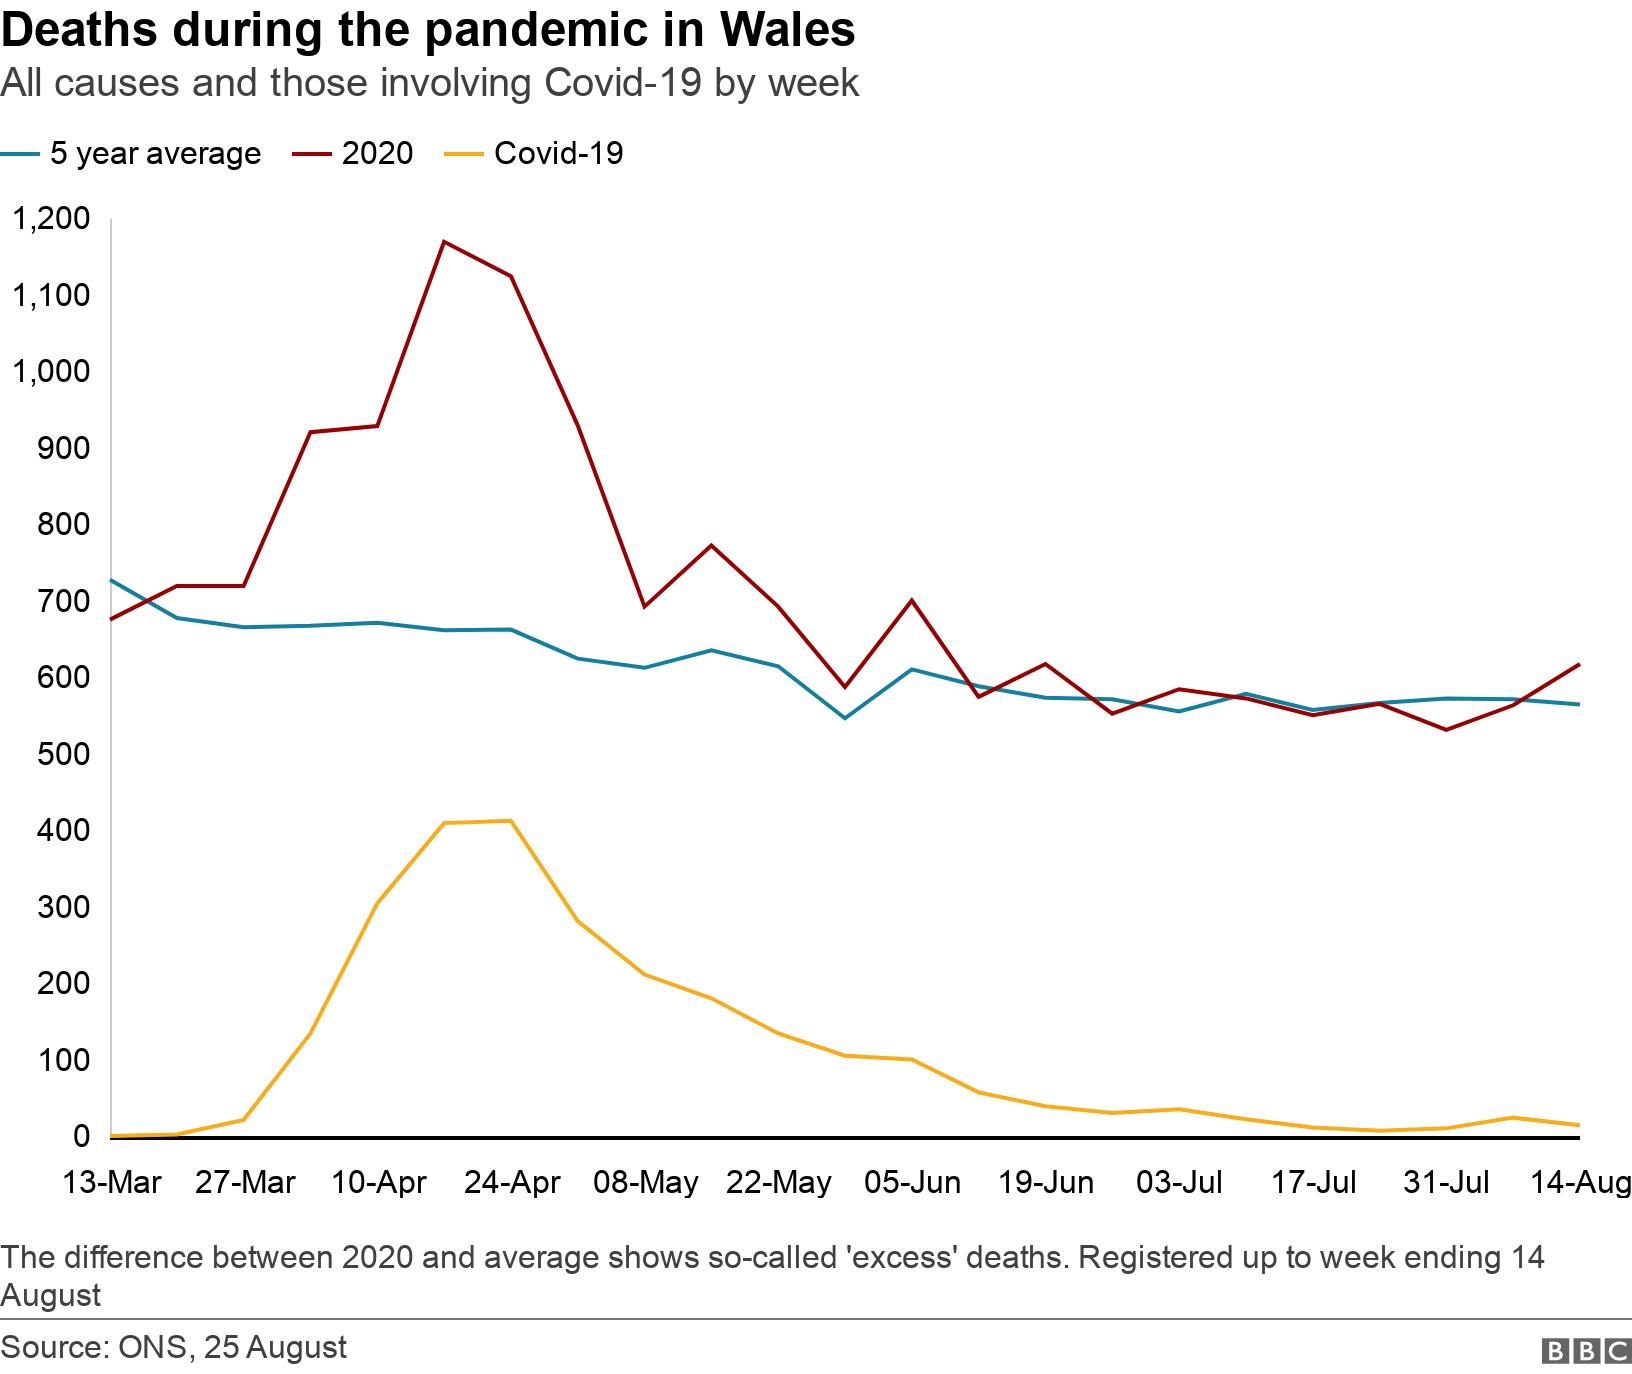 Deaths during the pandemic in Wales. All causes and those involving Covid-19 by week. The difference between 2020 and average shows so-called &#39;excess&#39; deaths. Registered up to week ending 14 August.